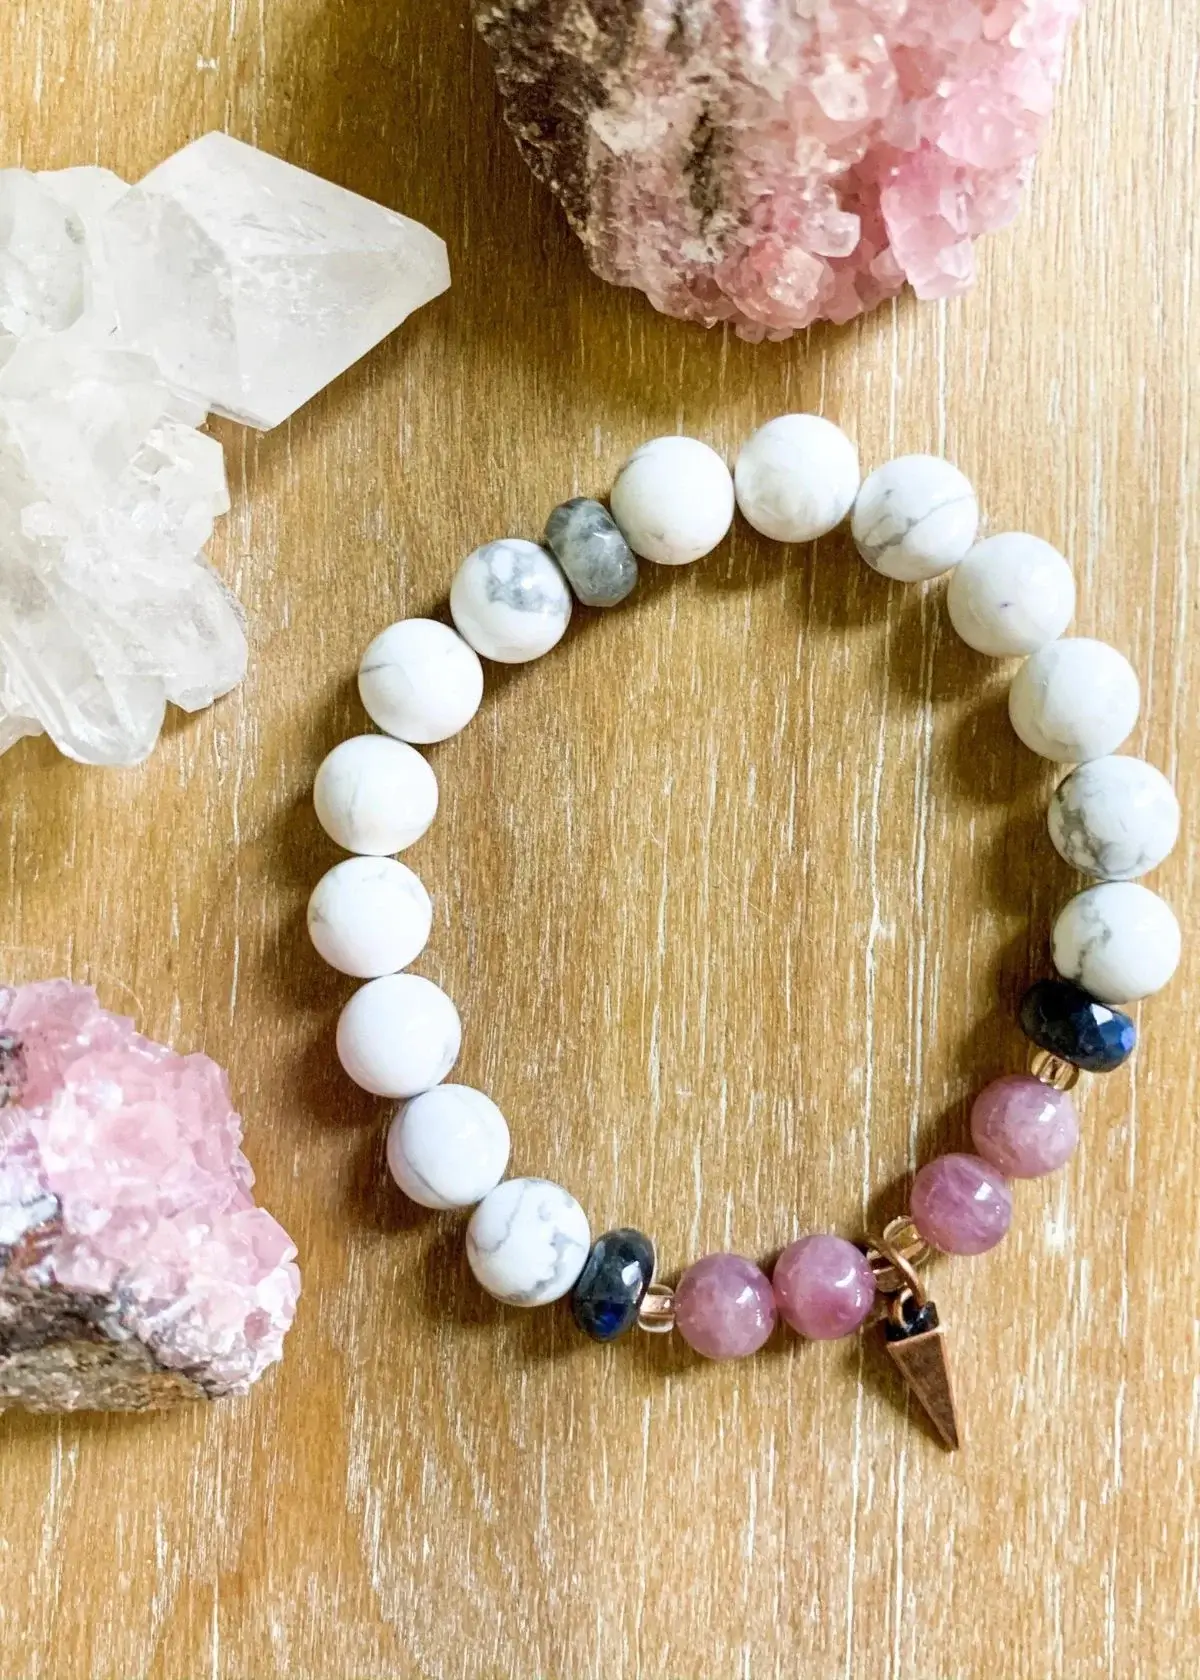 What is a howlite bracelet?